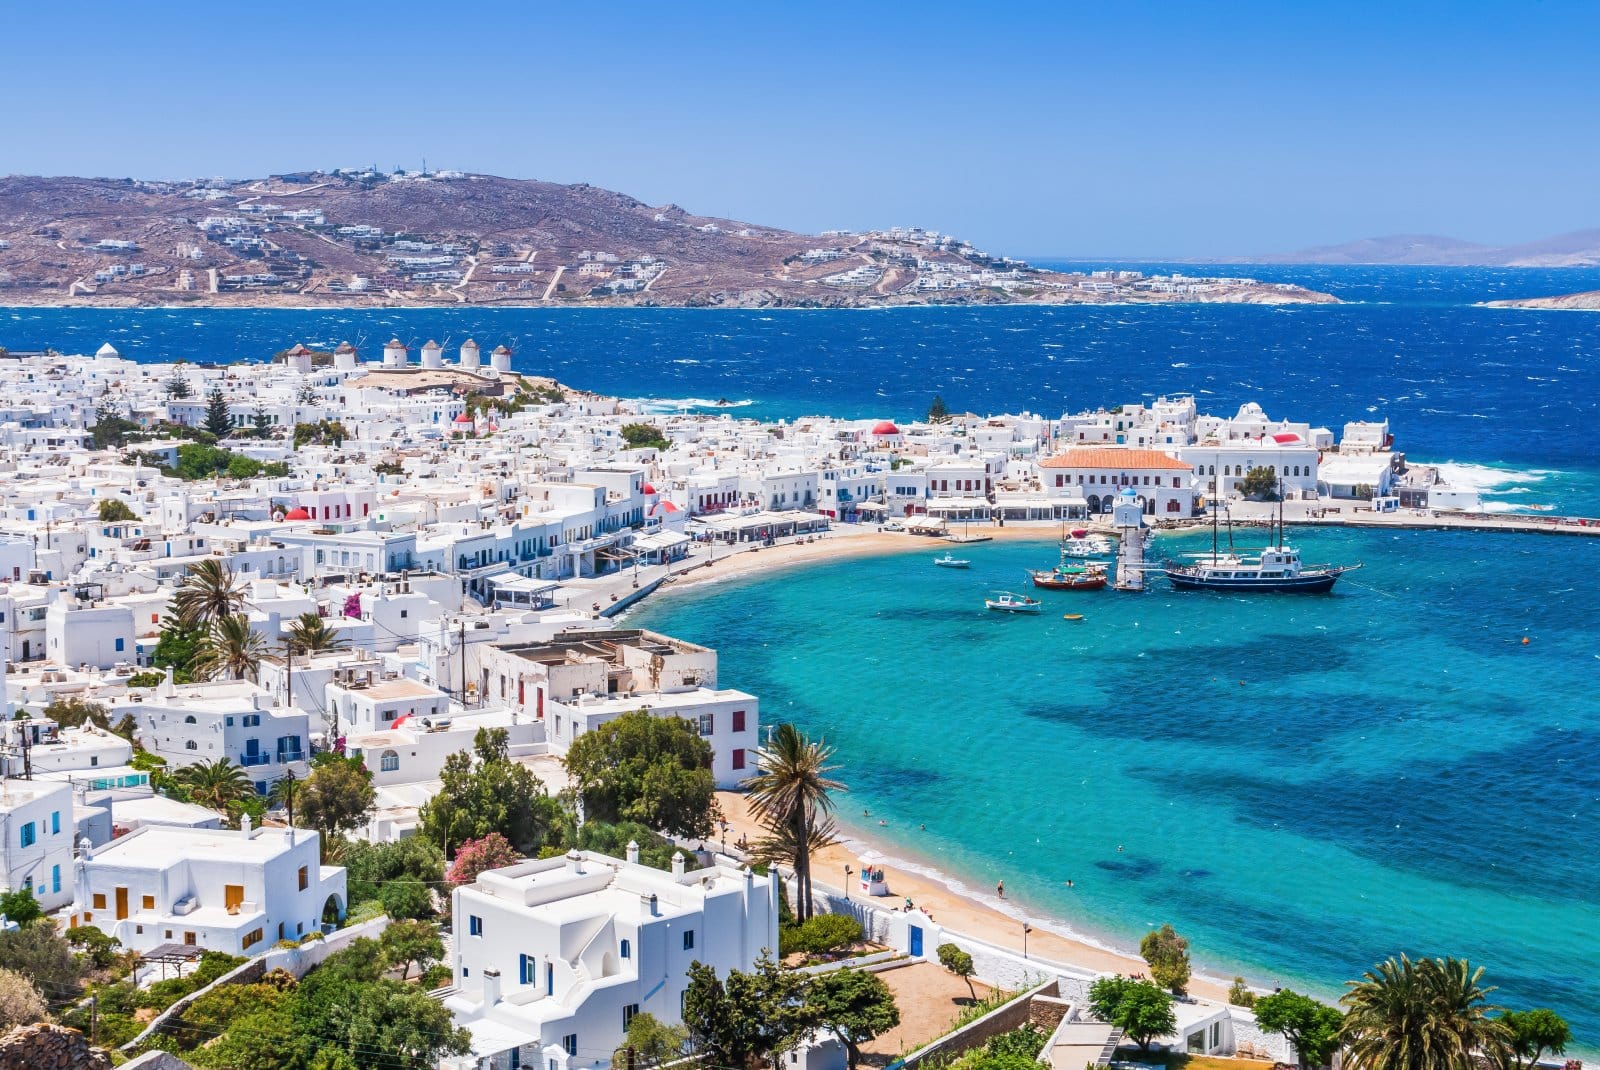 <p class="wp-caption-text">Image Credit: Shutterstock / Izabela23</p>  <p>The islands of Santorini and Mykonos are feeling the fatigue from American visitors who crowd the narrow streets and overwhelm small local businesses.</p>